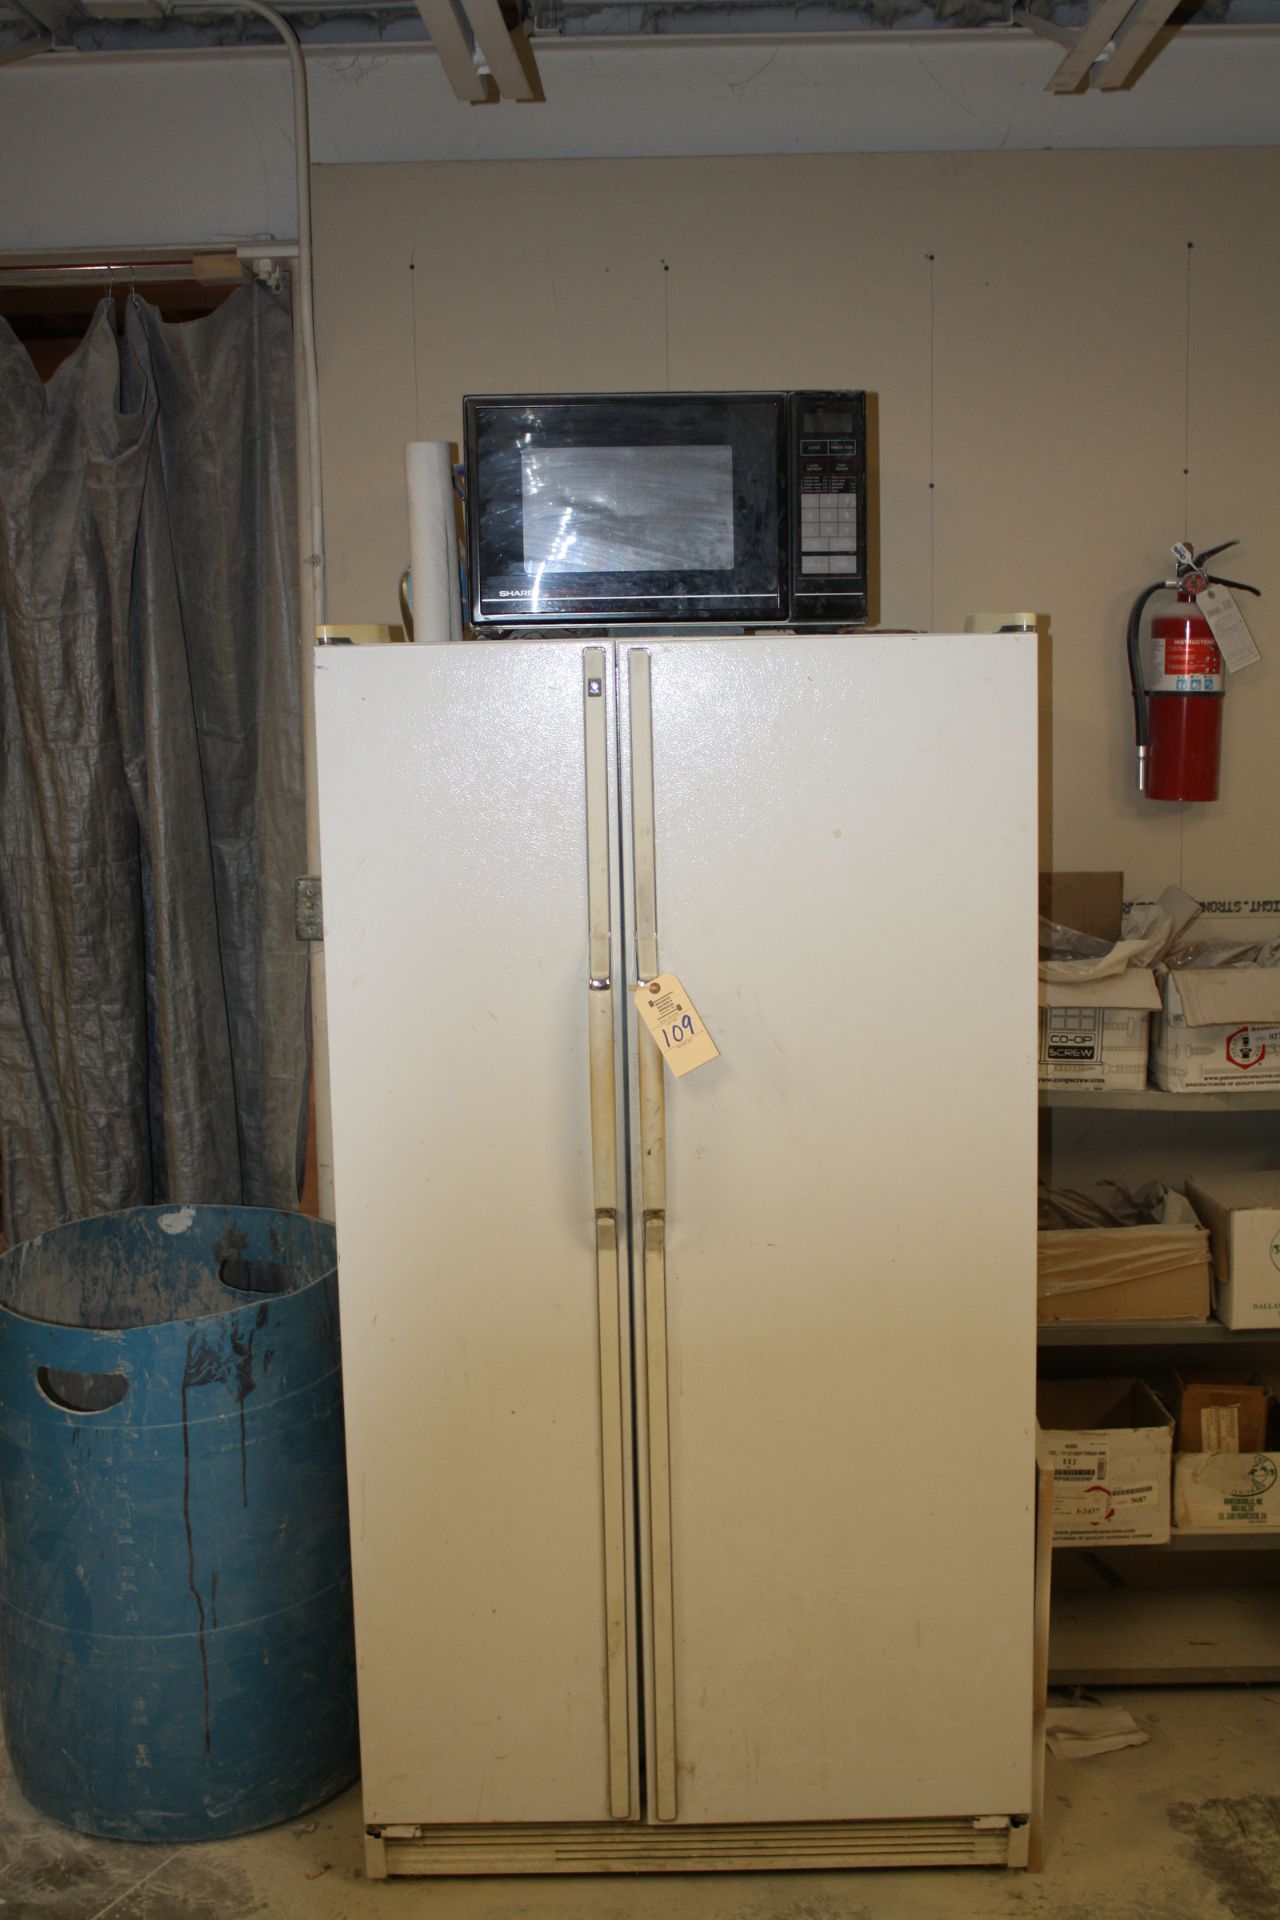 GE Sided by Side Refrigerator, Sharp Microwave - Image 2 of 2